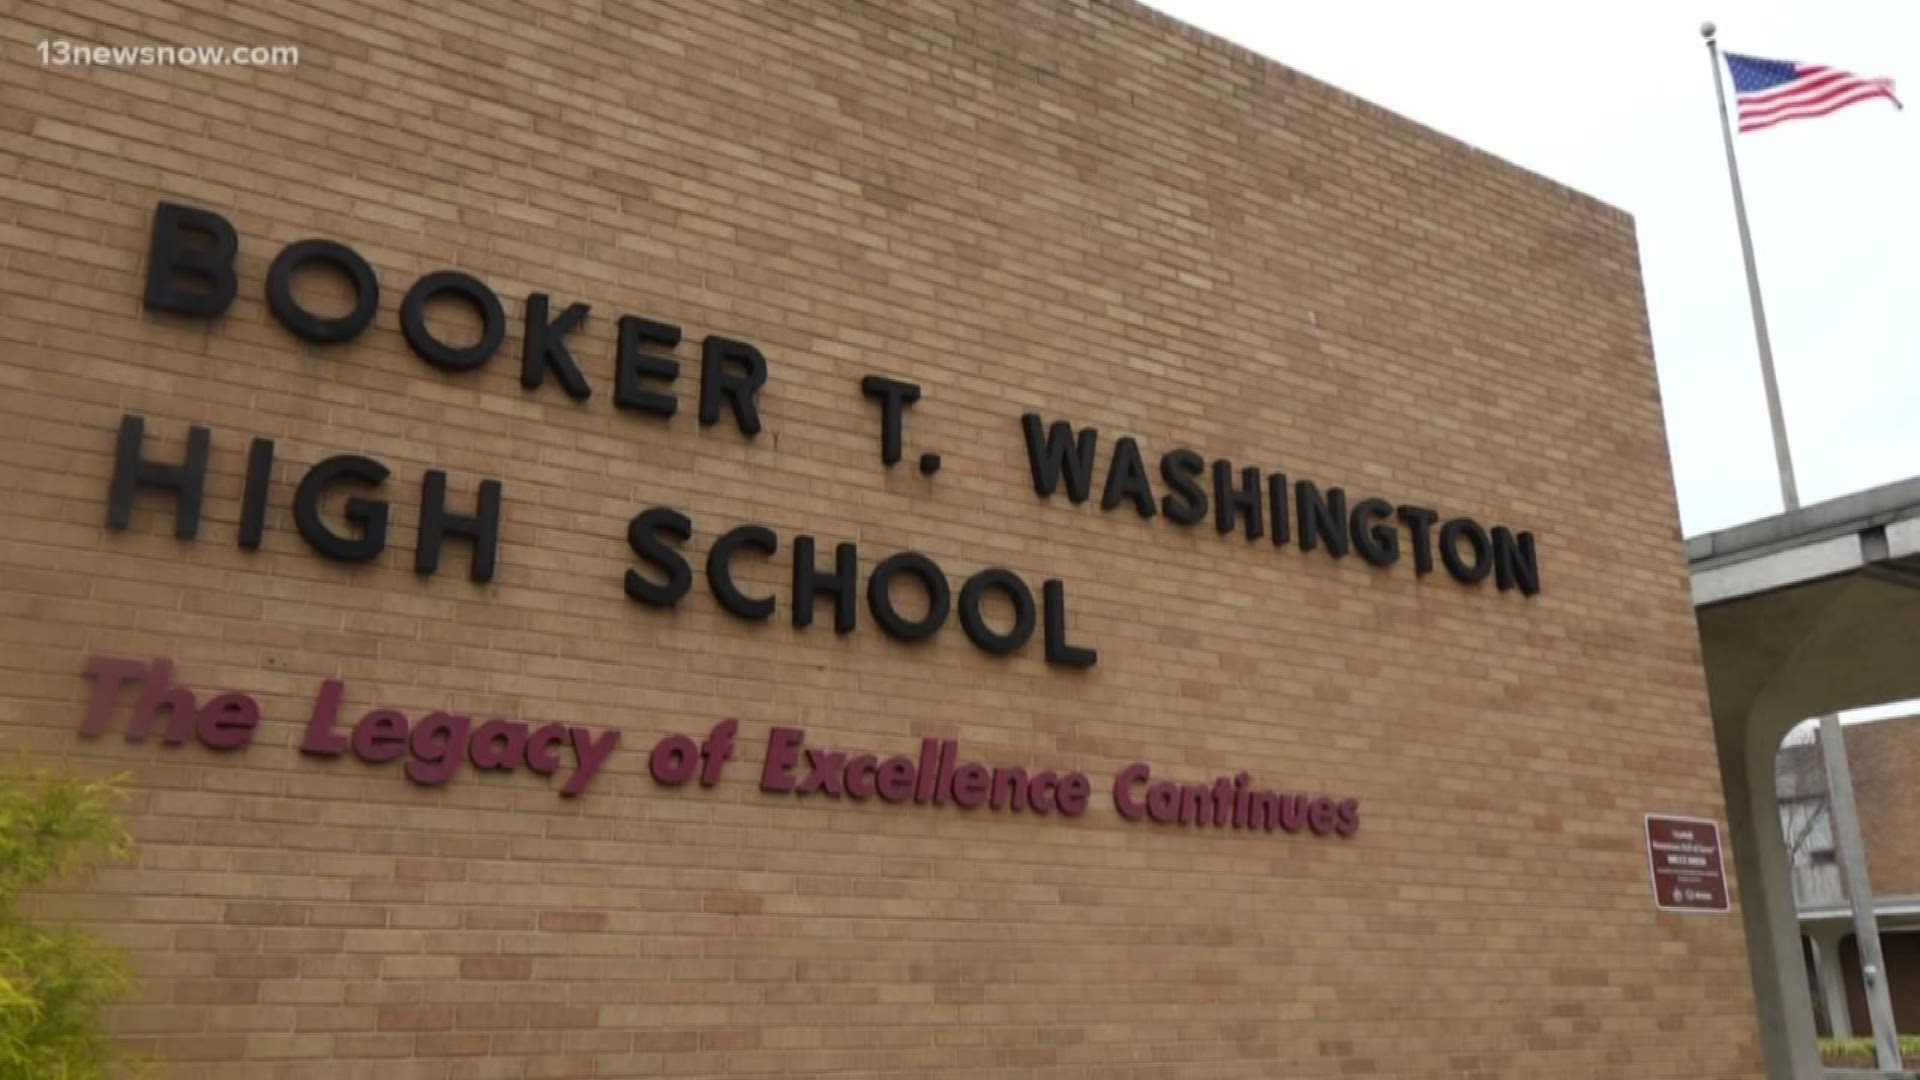 Booker T. Washington High School in Norfolk became Virginia's first accredited public high school for African-Americans in 1917.